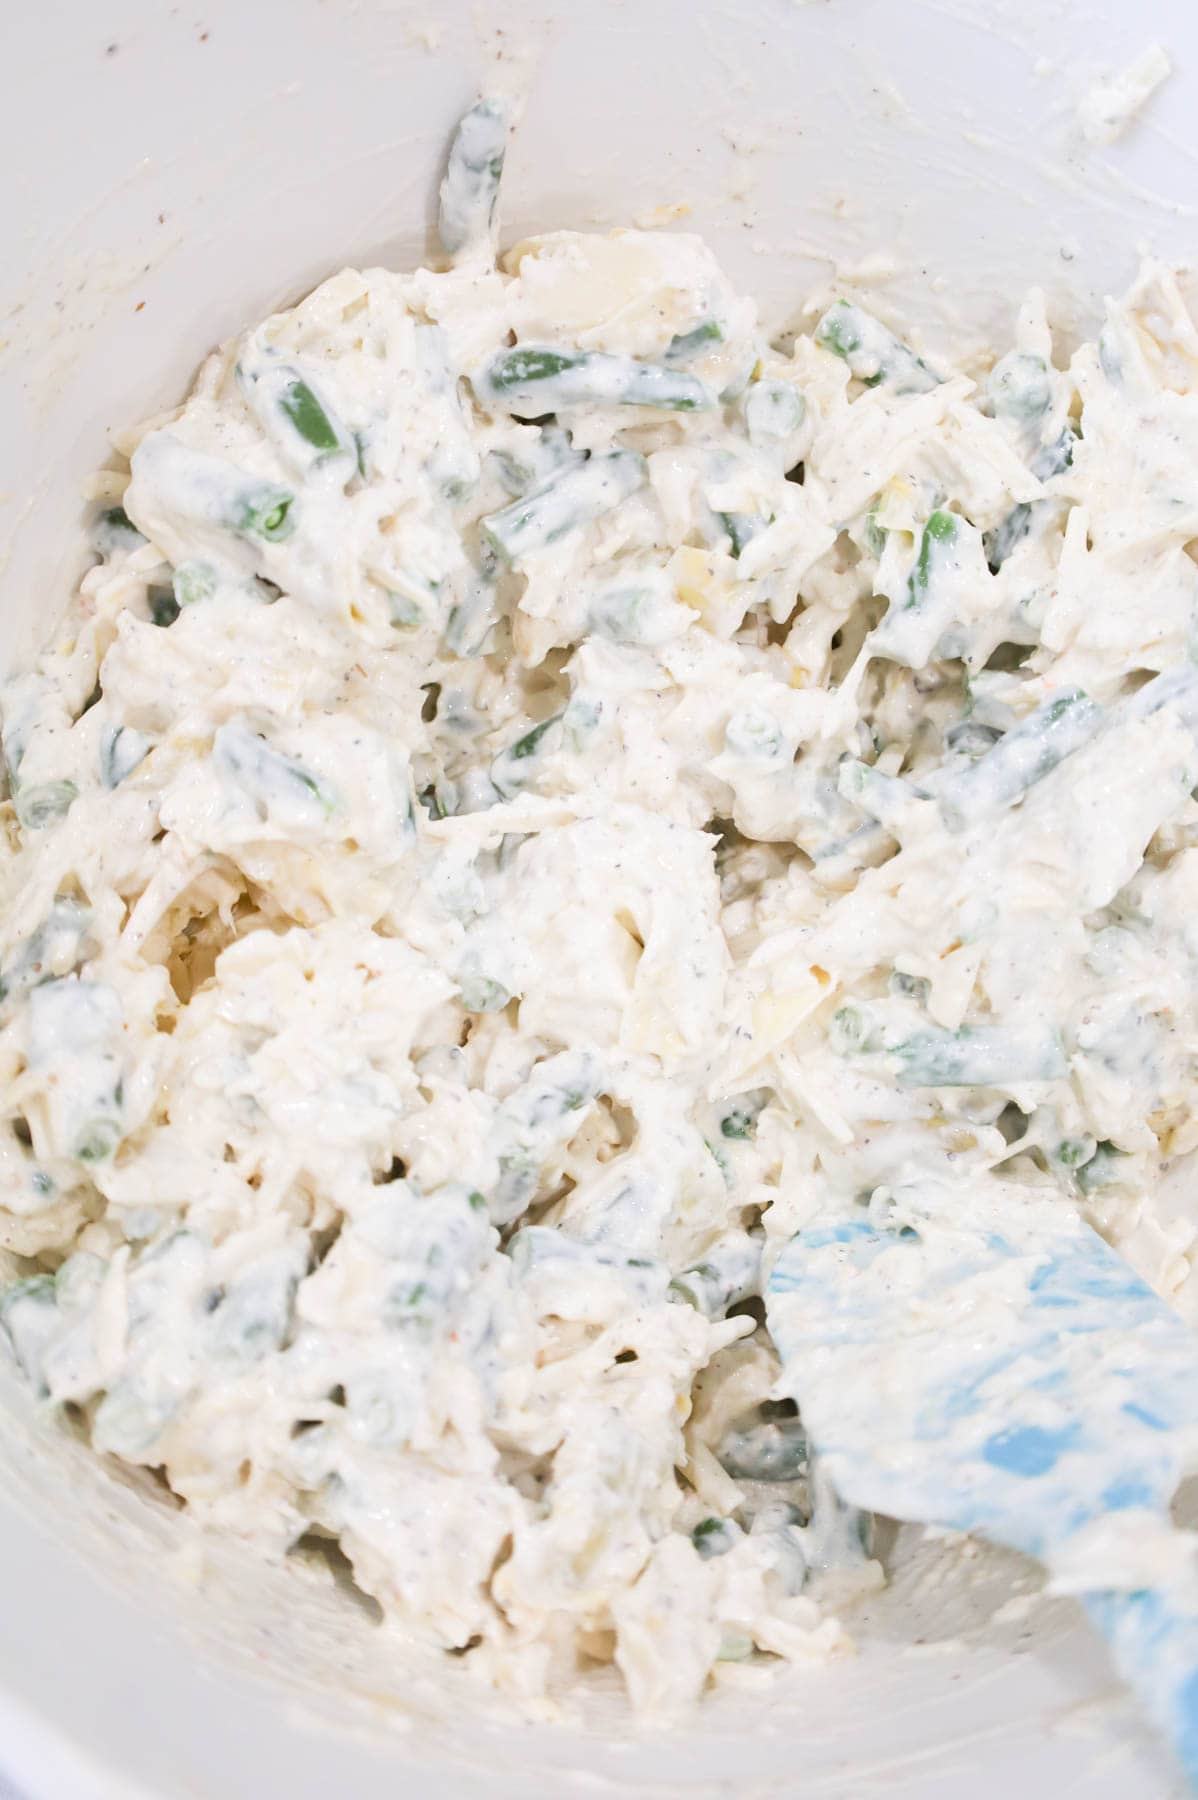 shredded cheese, green beans, artichoke hearts, cream cheese and sour cream mixture in a bowl